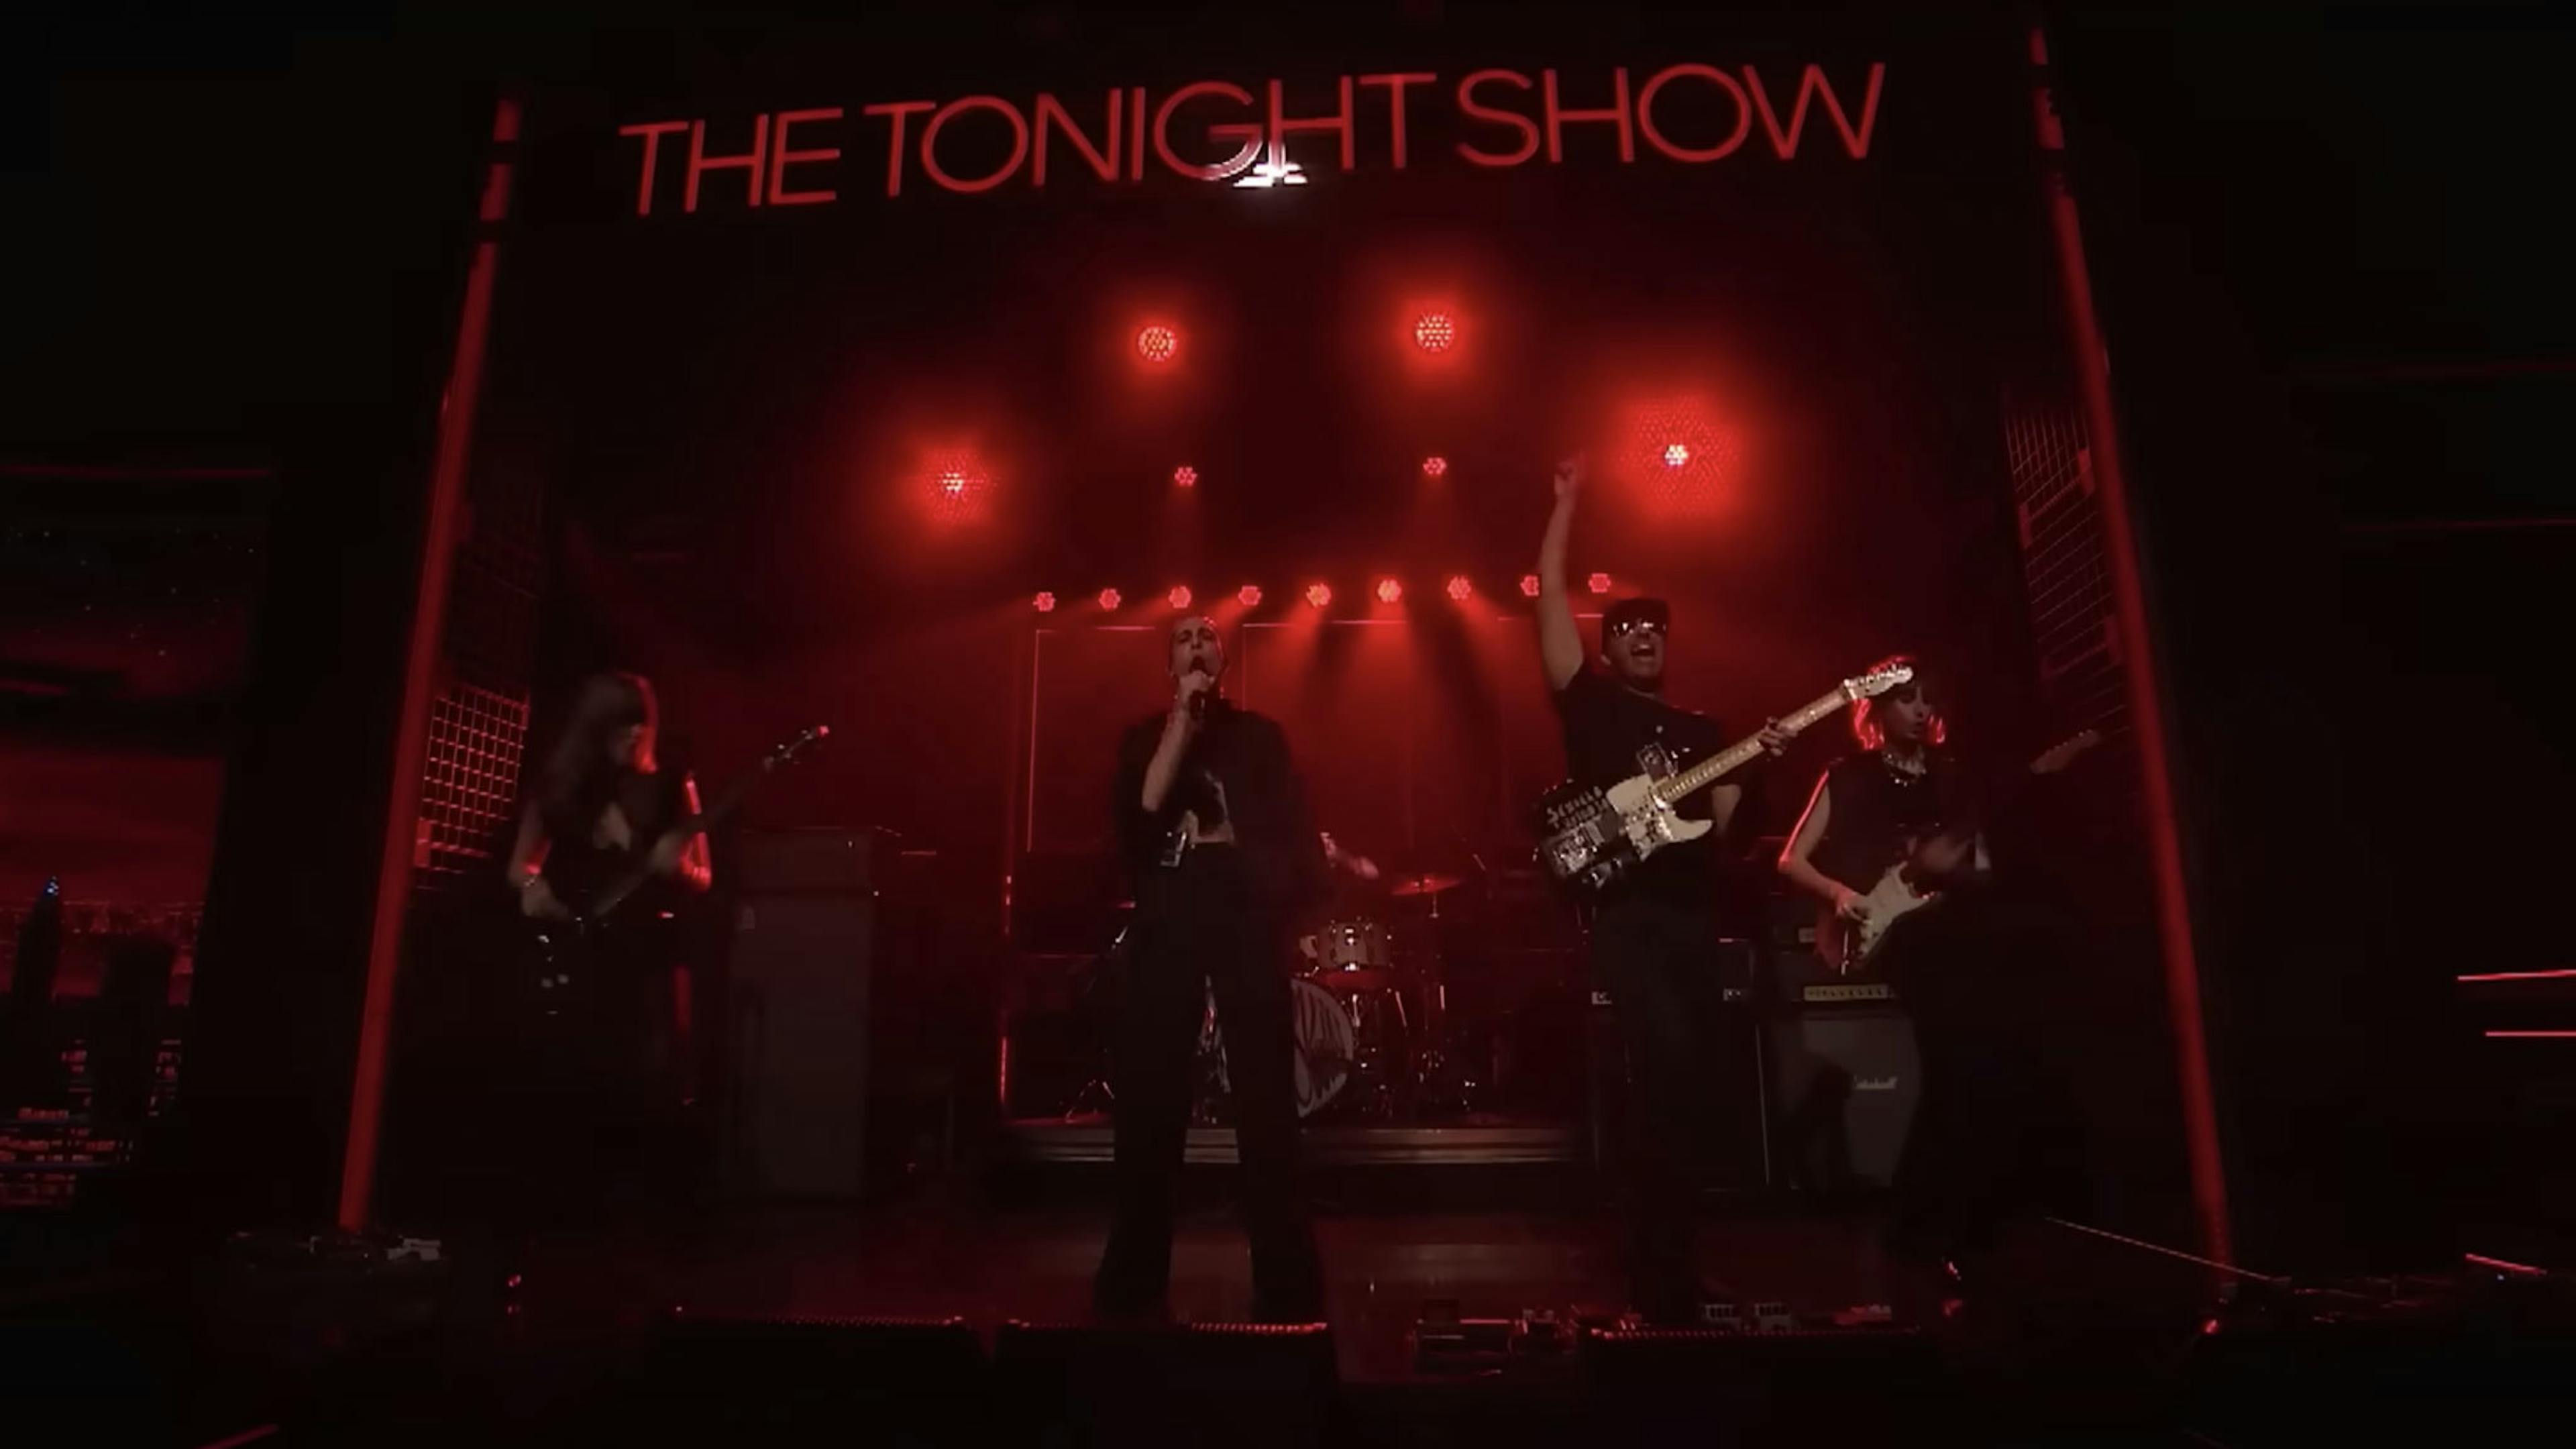 Watch Måneskin and Tom Morello’s energetic performance of GOSSIP on The Tonight Show